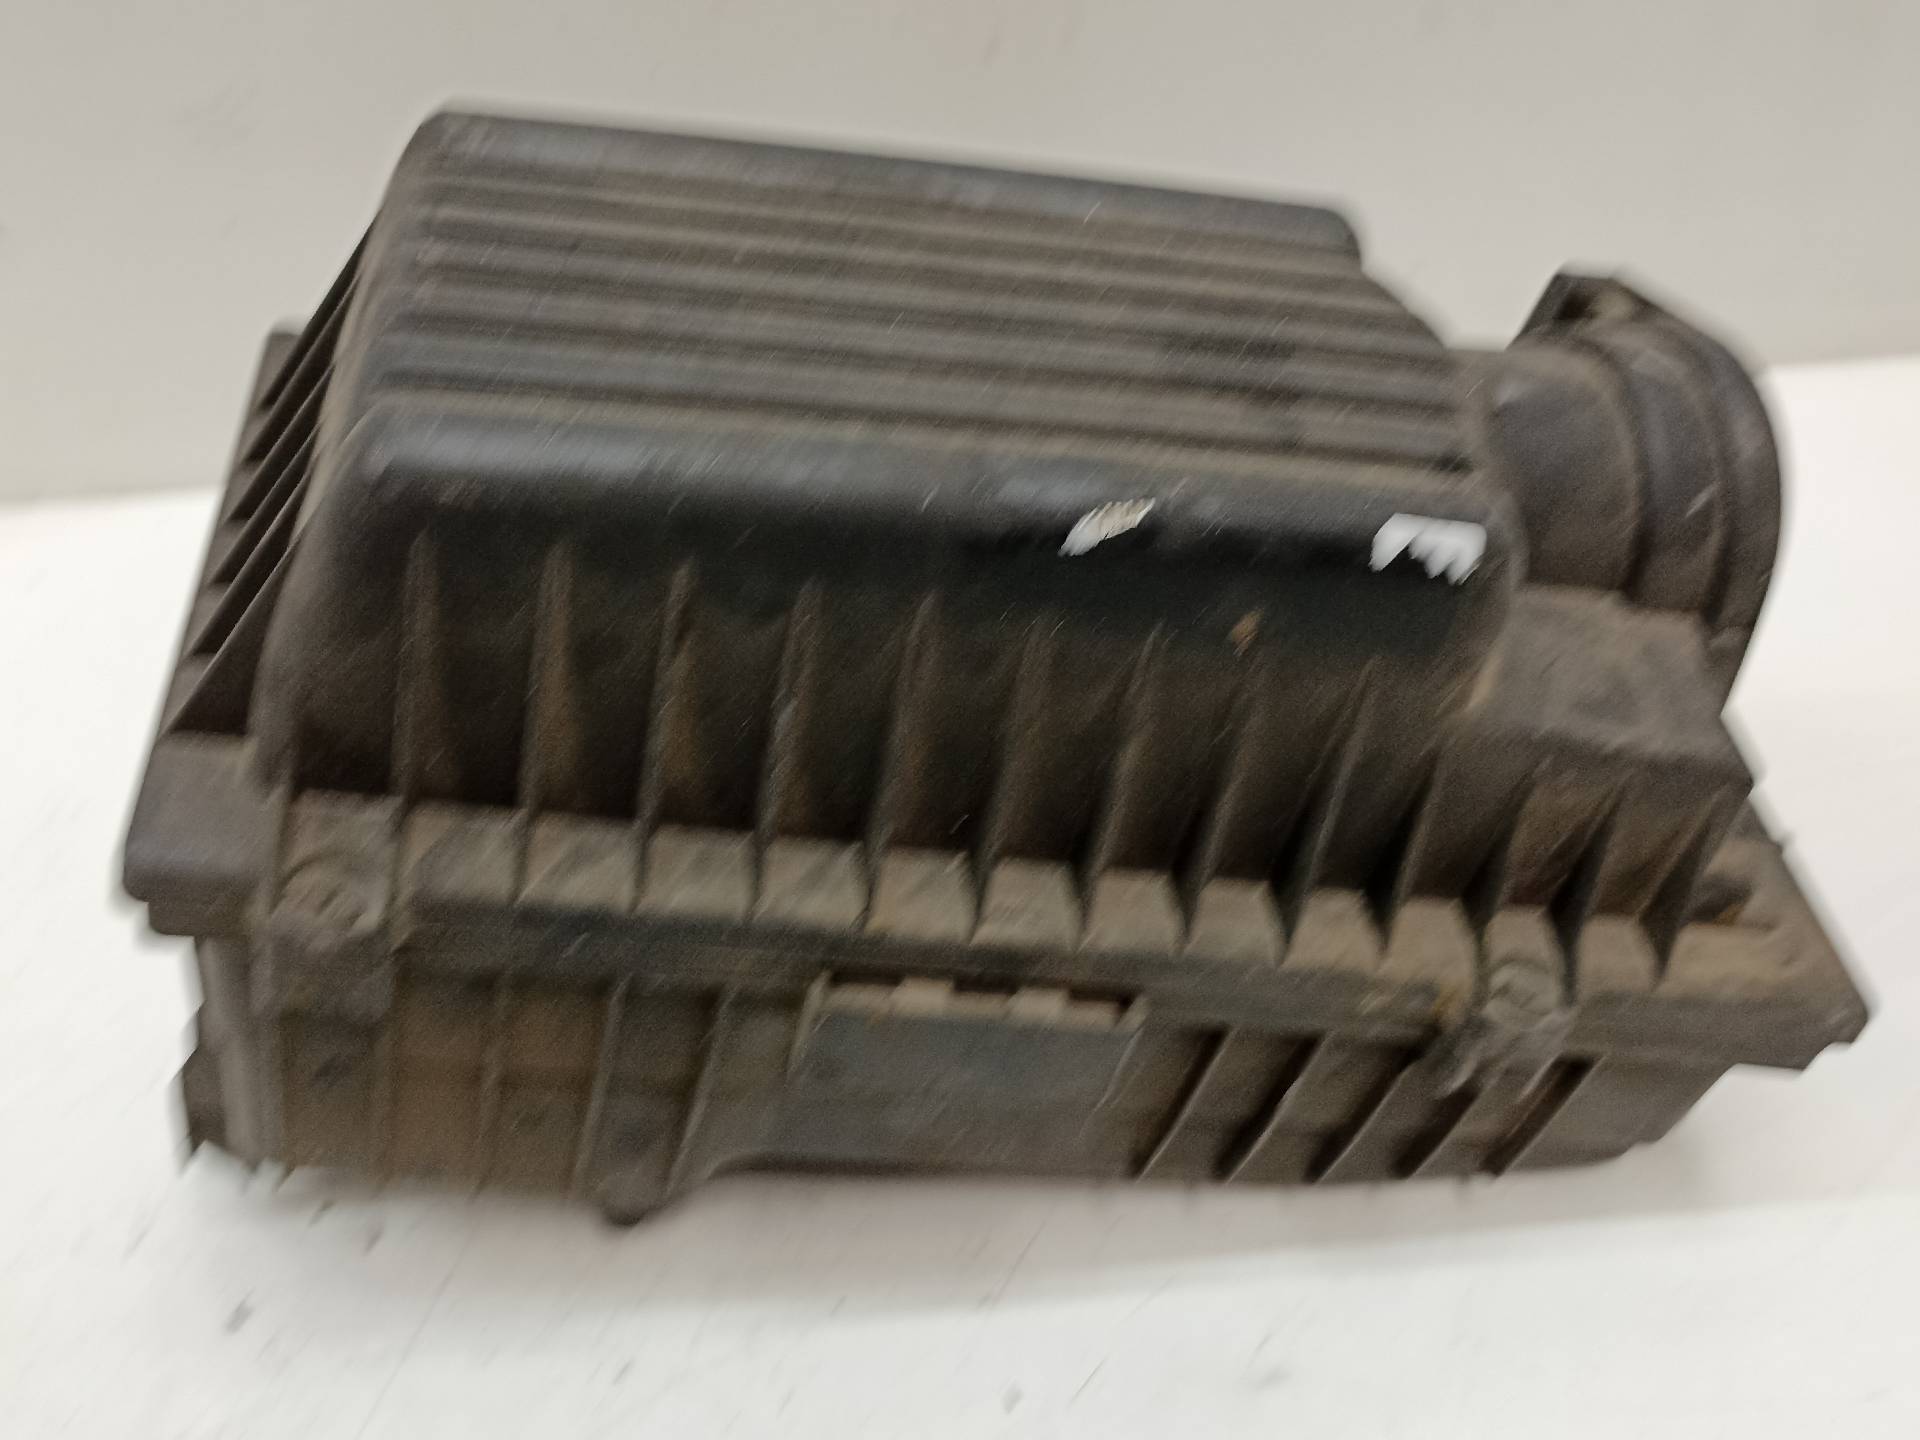 SAAB Expert 1 generation (1996-2007) Other Engine Compartment Parts 9632144780 24314237